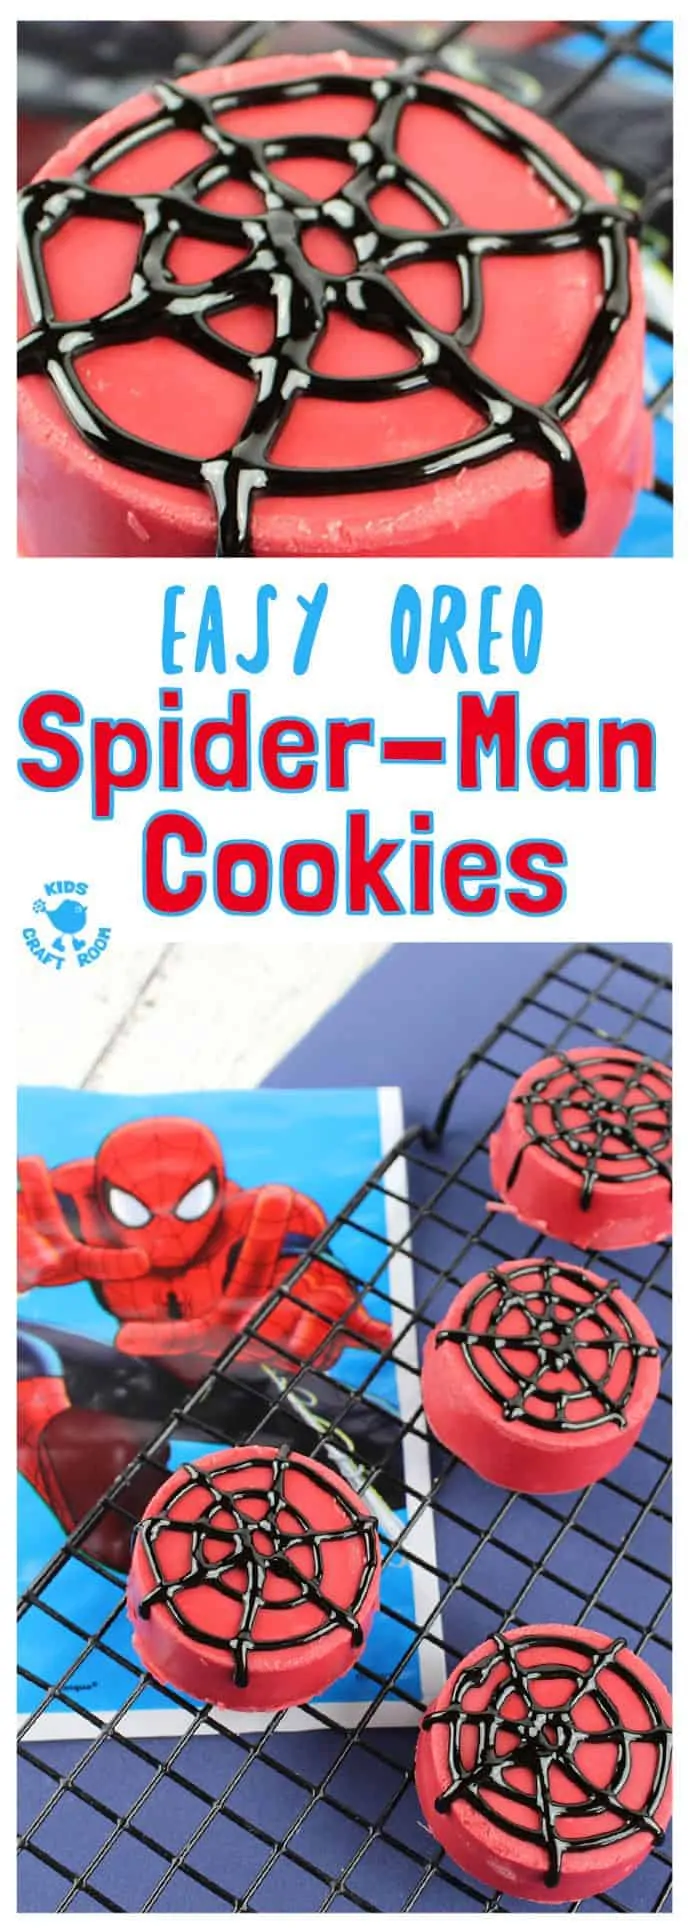 OREO SPIDER-MAN COOKIES - Great for cooking with kids. They look awesome, taste delicious and are super easy to make. A Spider-Man recipe great for Spider-Man parties and movie nights. A fun spider activity for Spider-Man fans big and small.#cookingwithkids #kidsrecipes #kidsinthekitchen #desserts #oreos #cookies #biscuits #spiderman #kidscraftroom